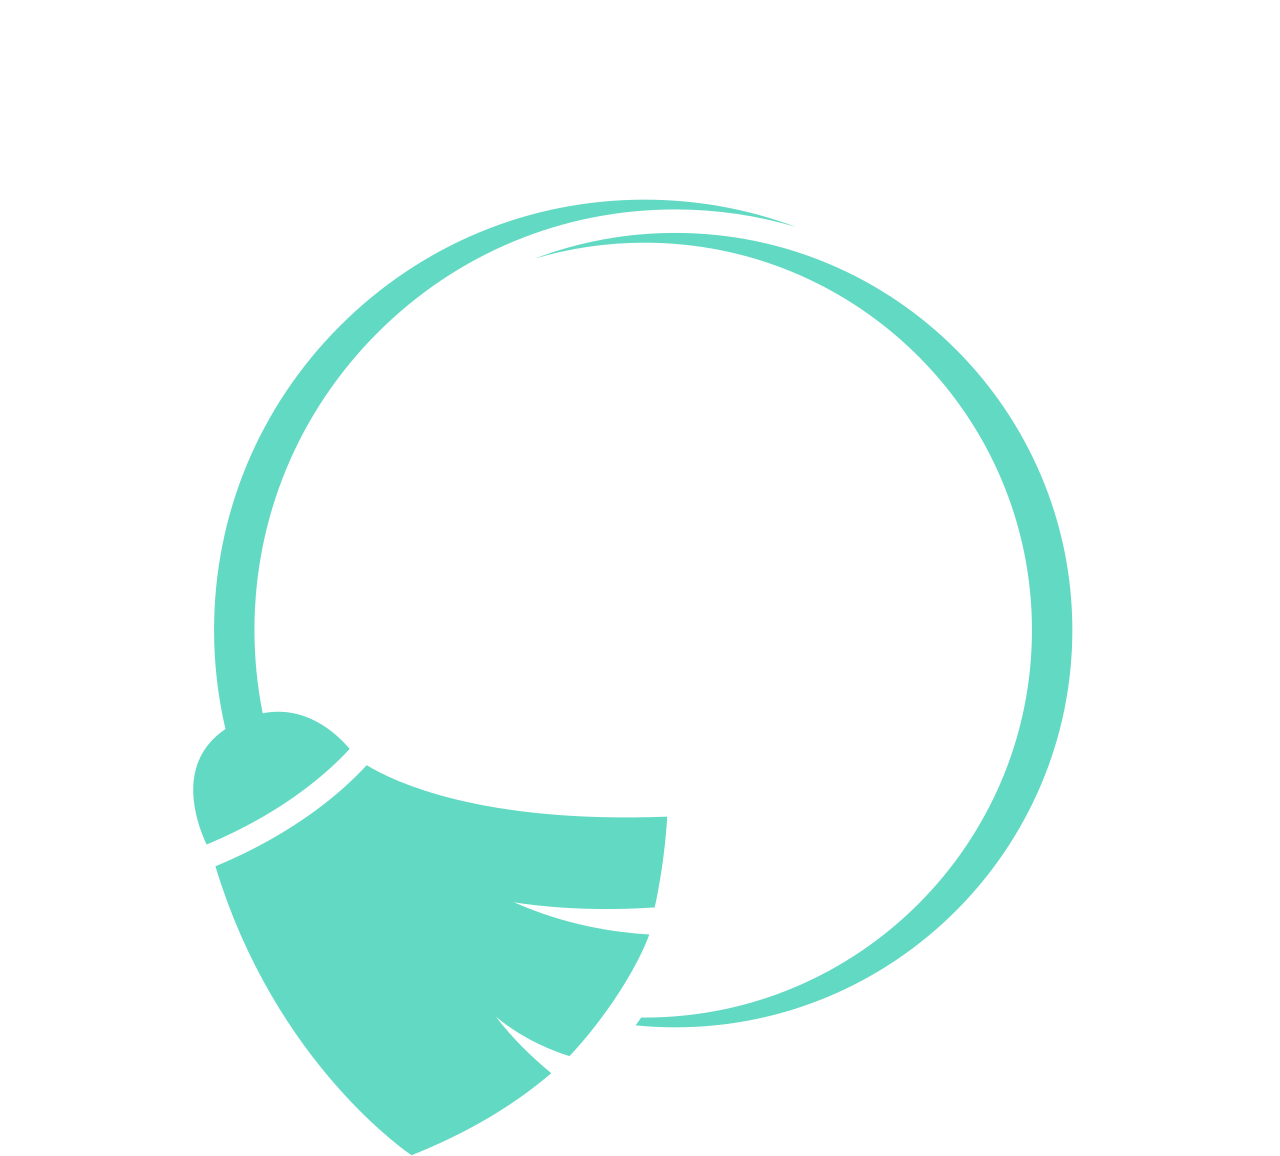 ELO'S CLEANING SERVICES LLC 's web page